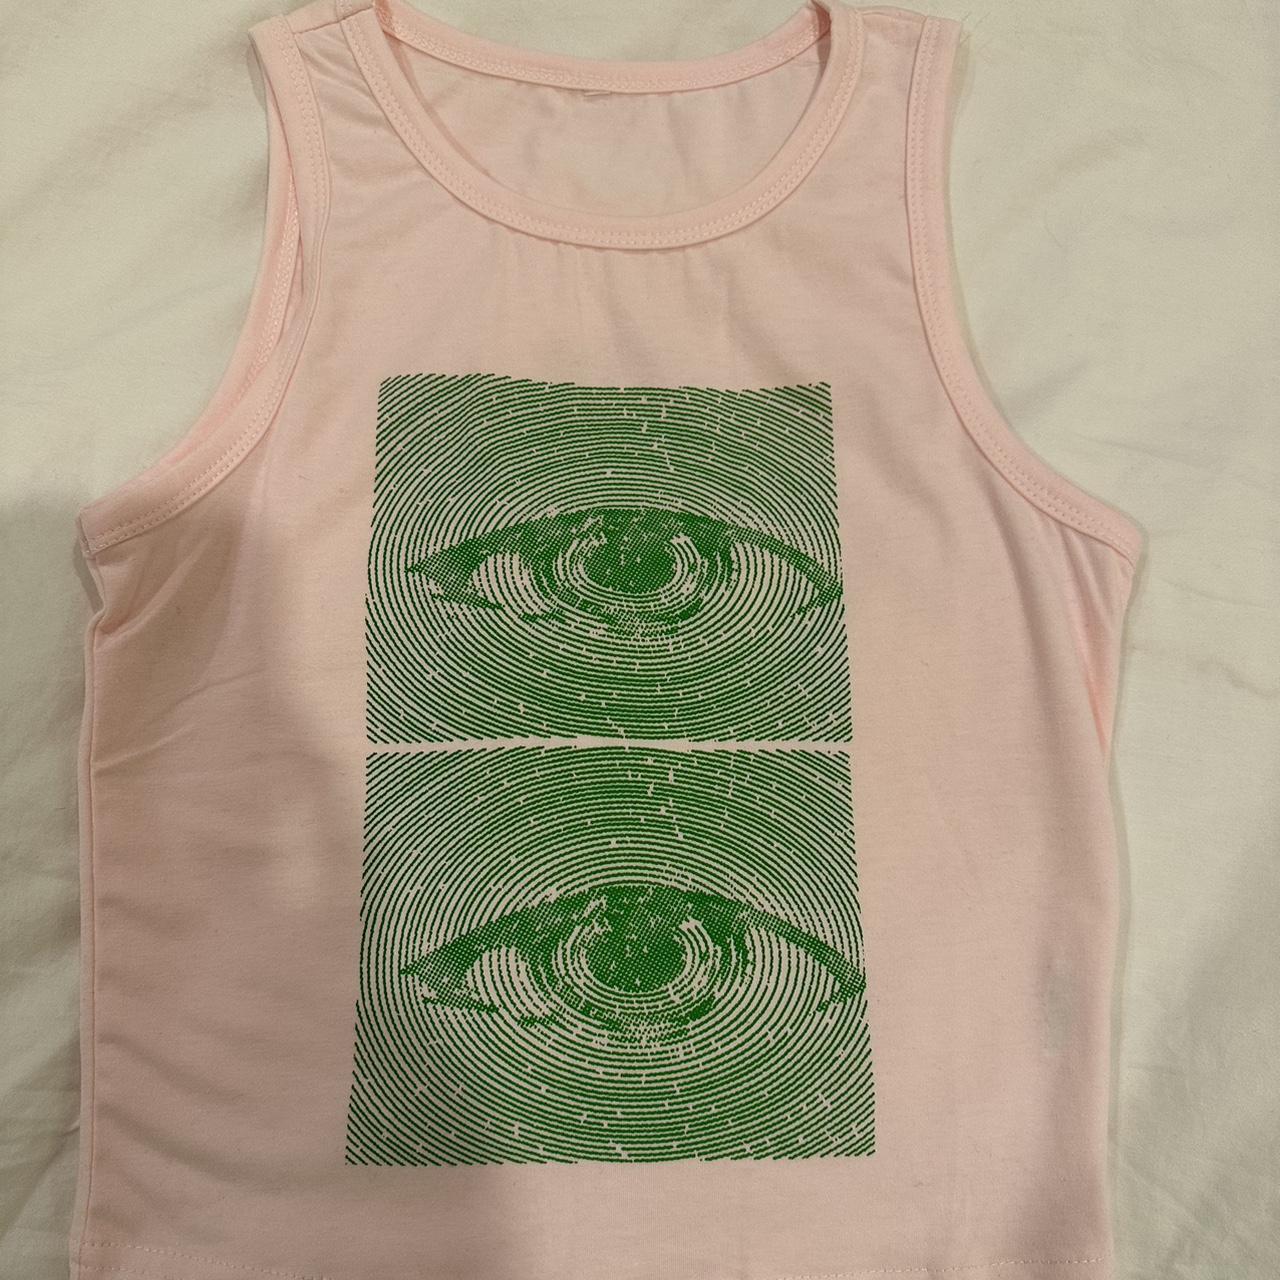 Cute pink tank top with green eyes pattern -never - Depop